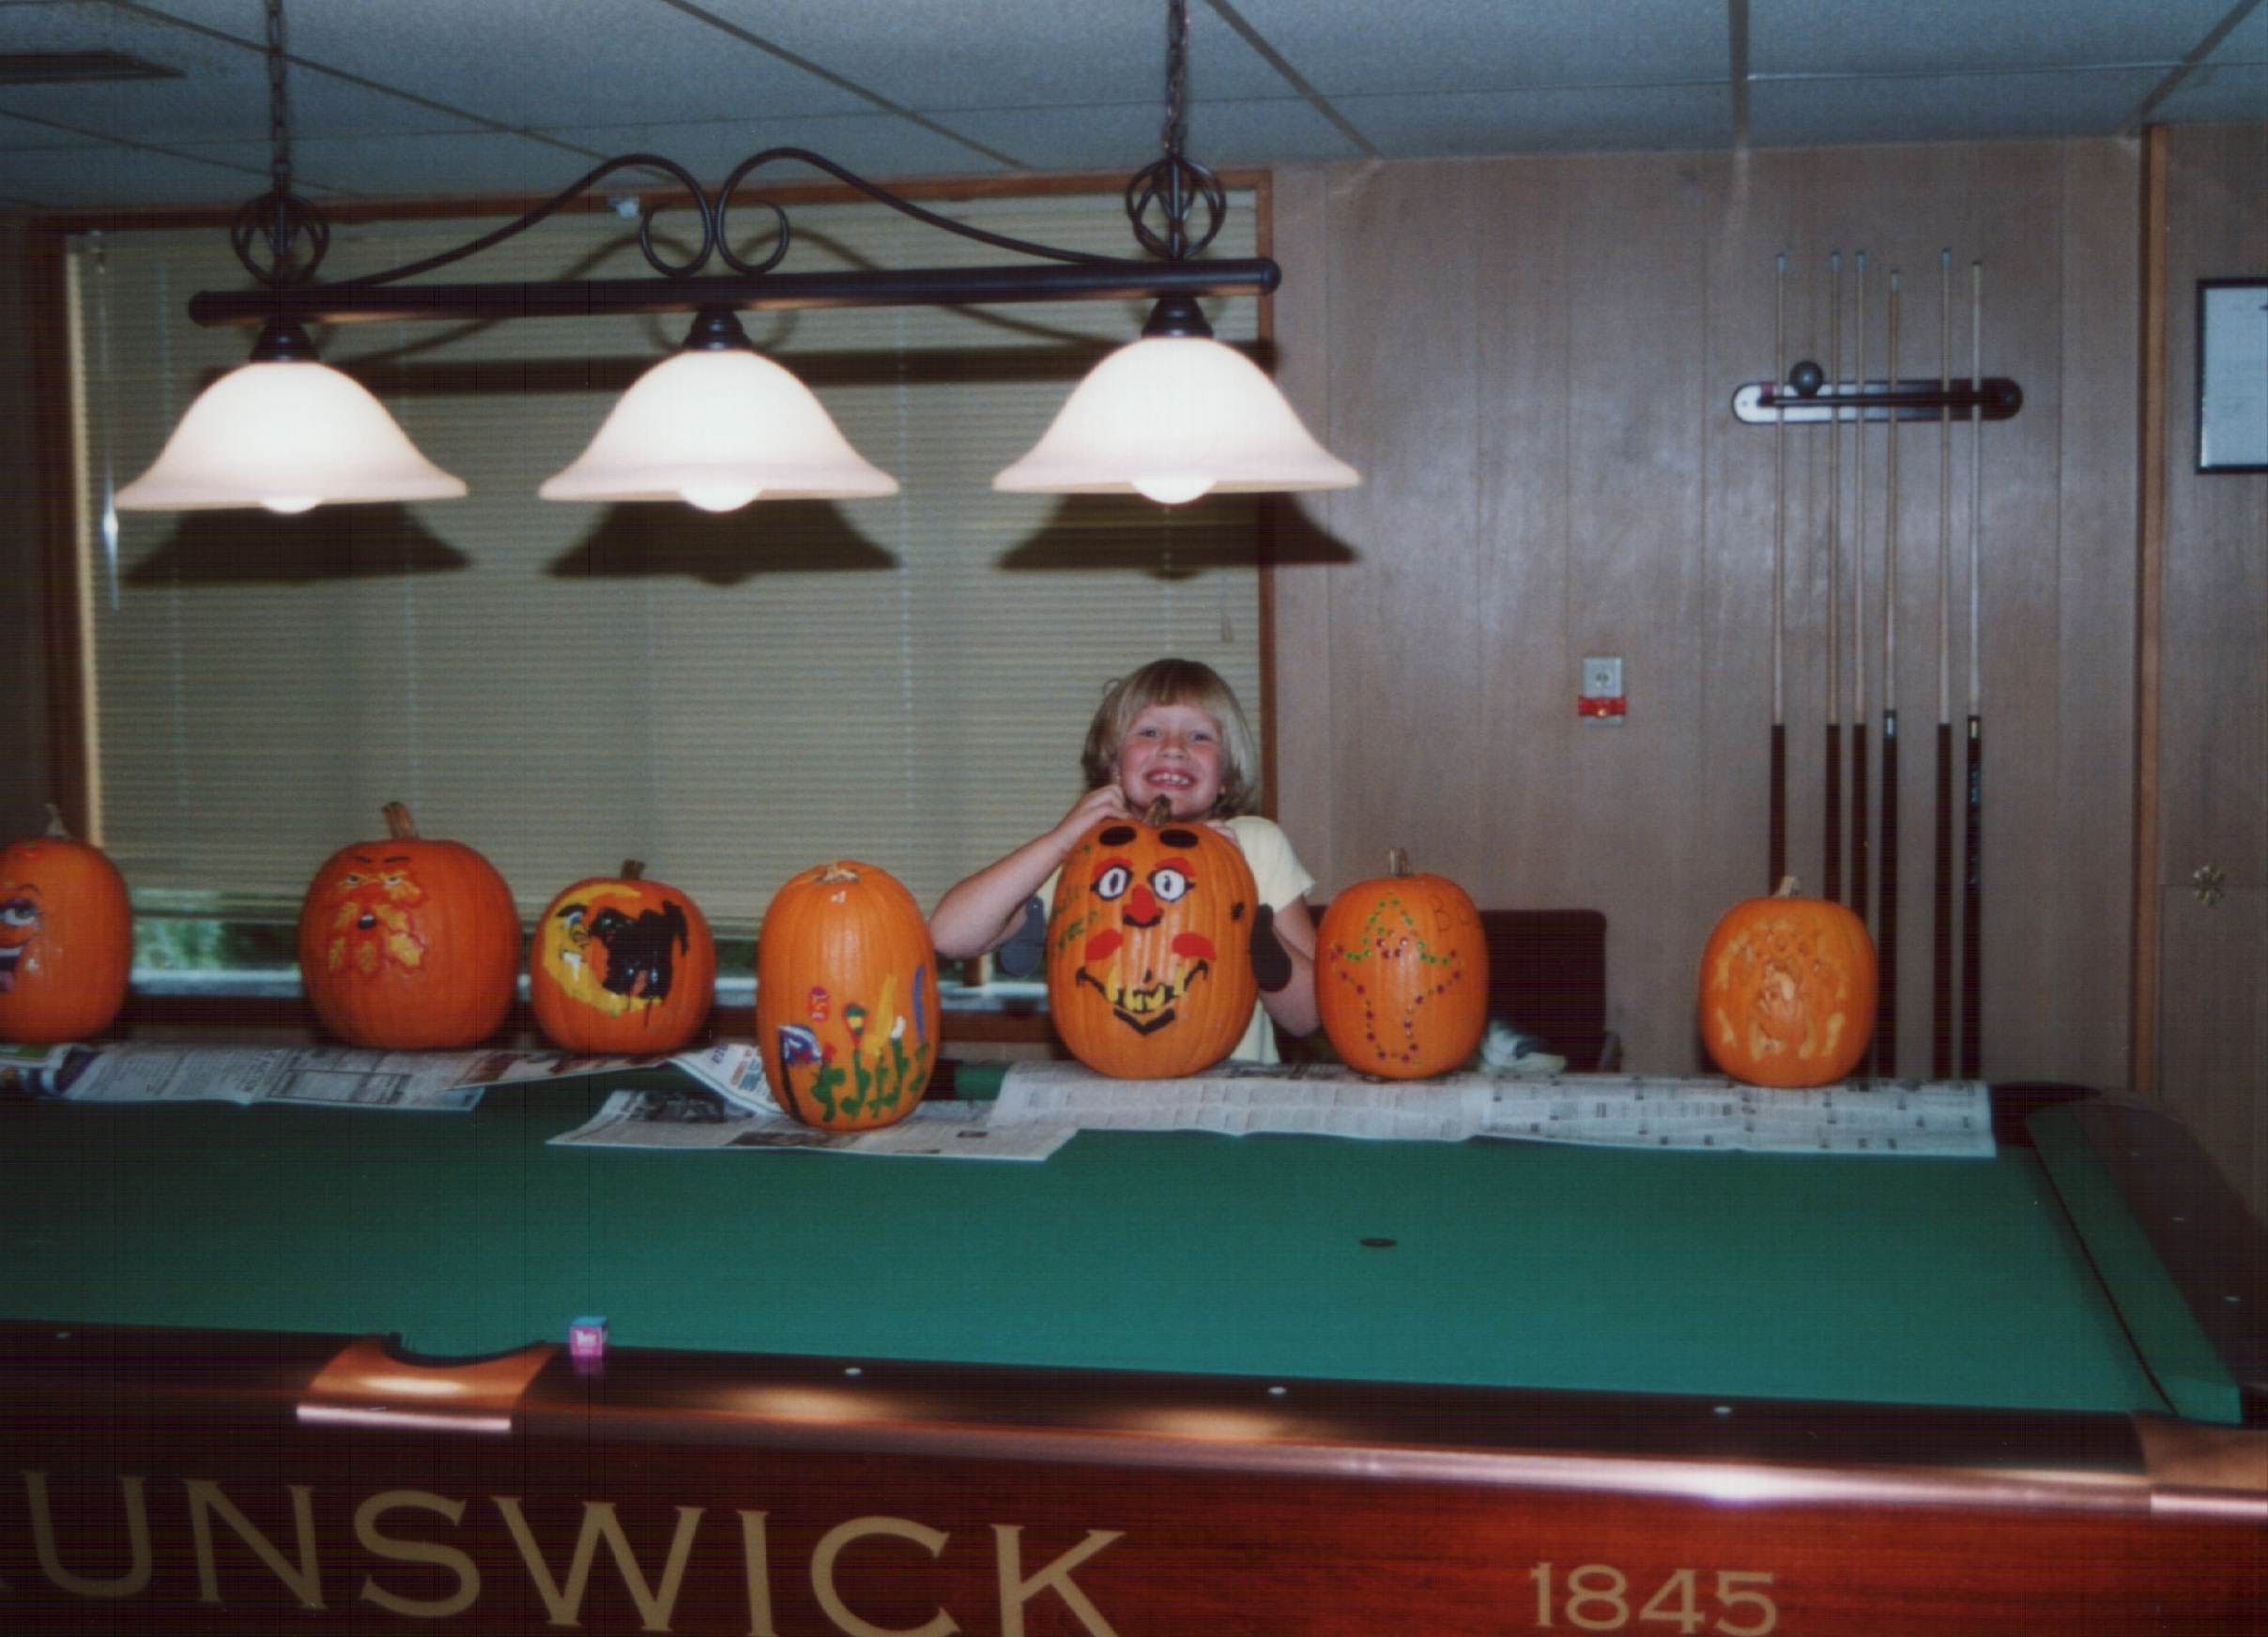 Sandy's daughter Courtney with painted pumpkins